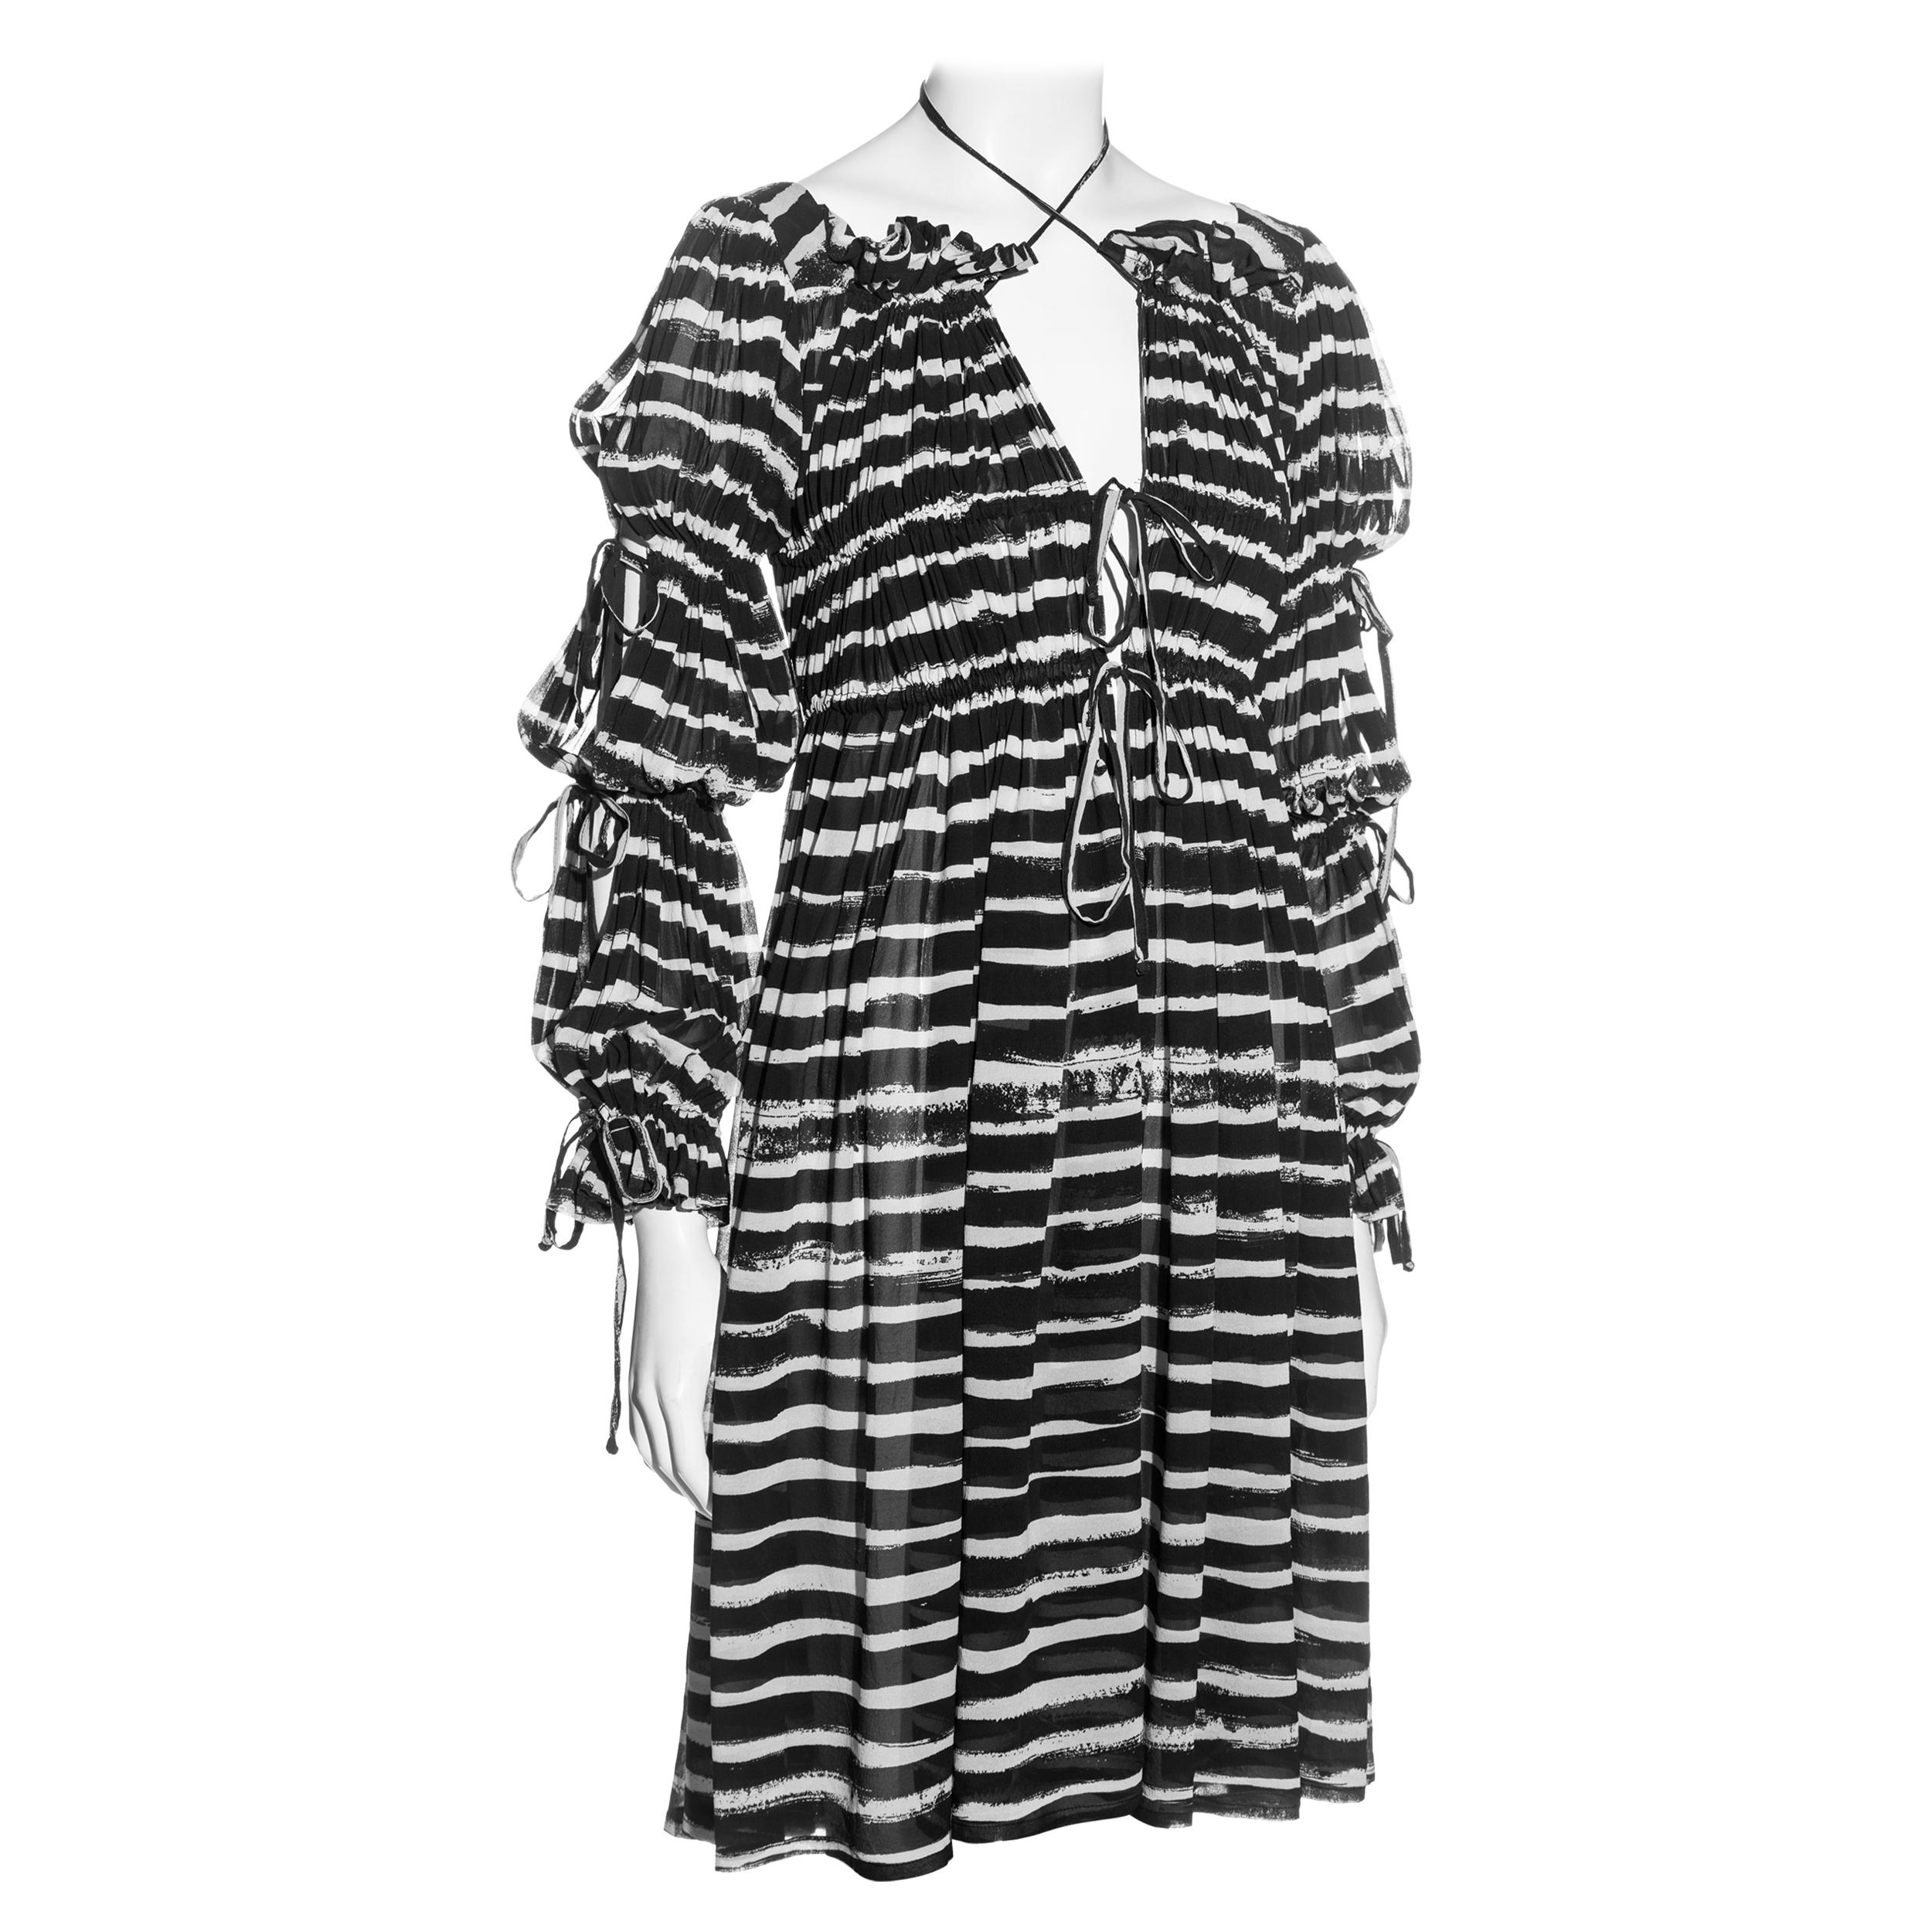 Vivienne Westwood black and white striped cotton gathered dress, ss 1996